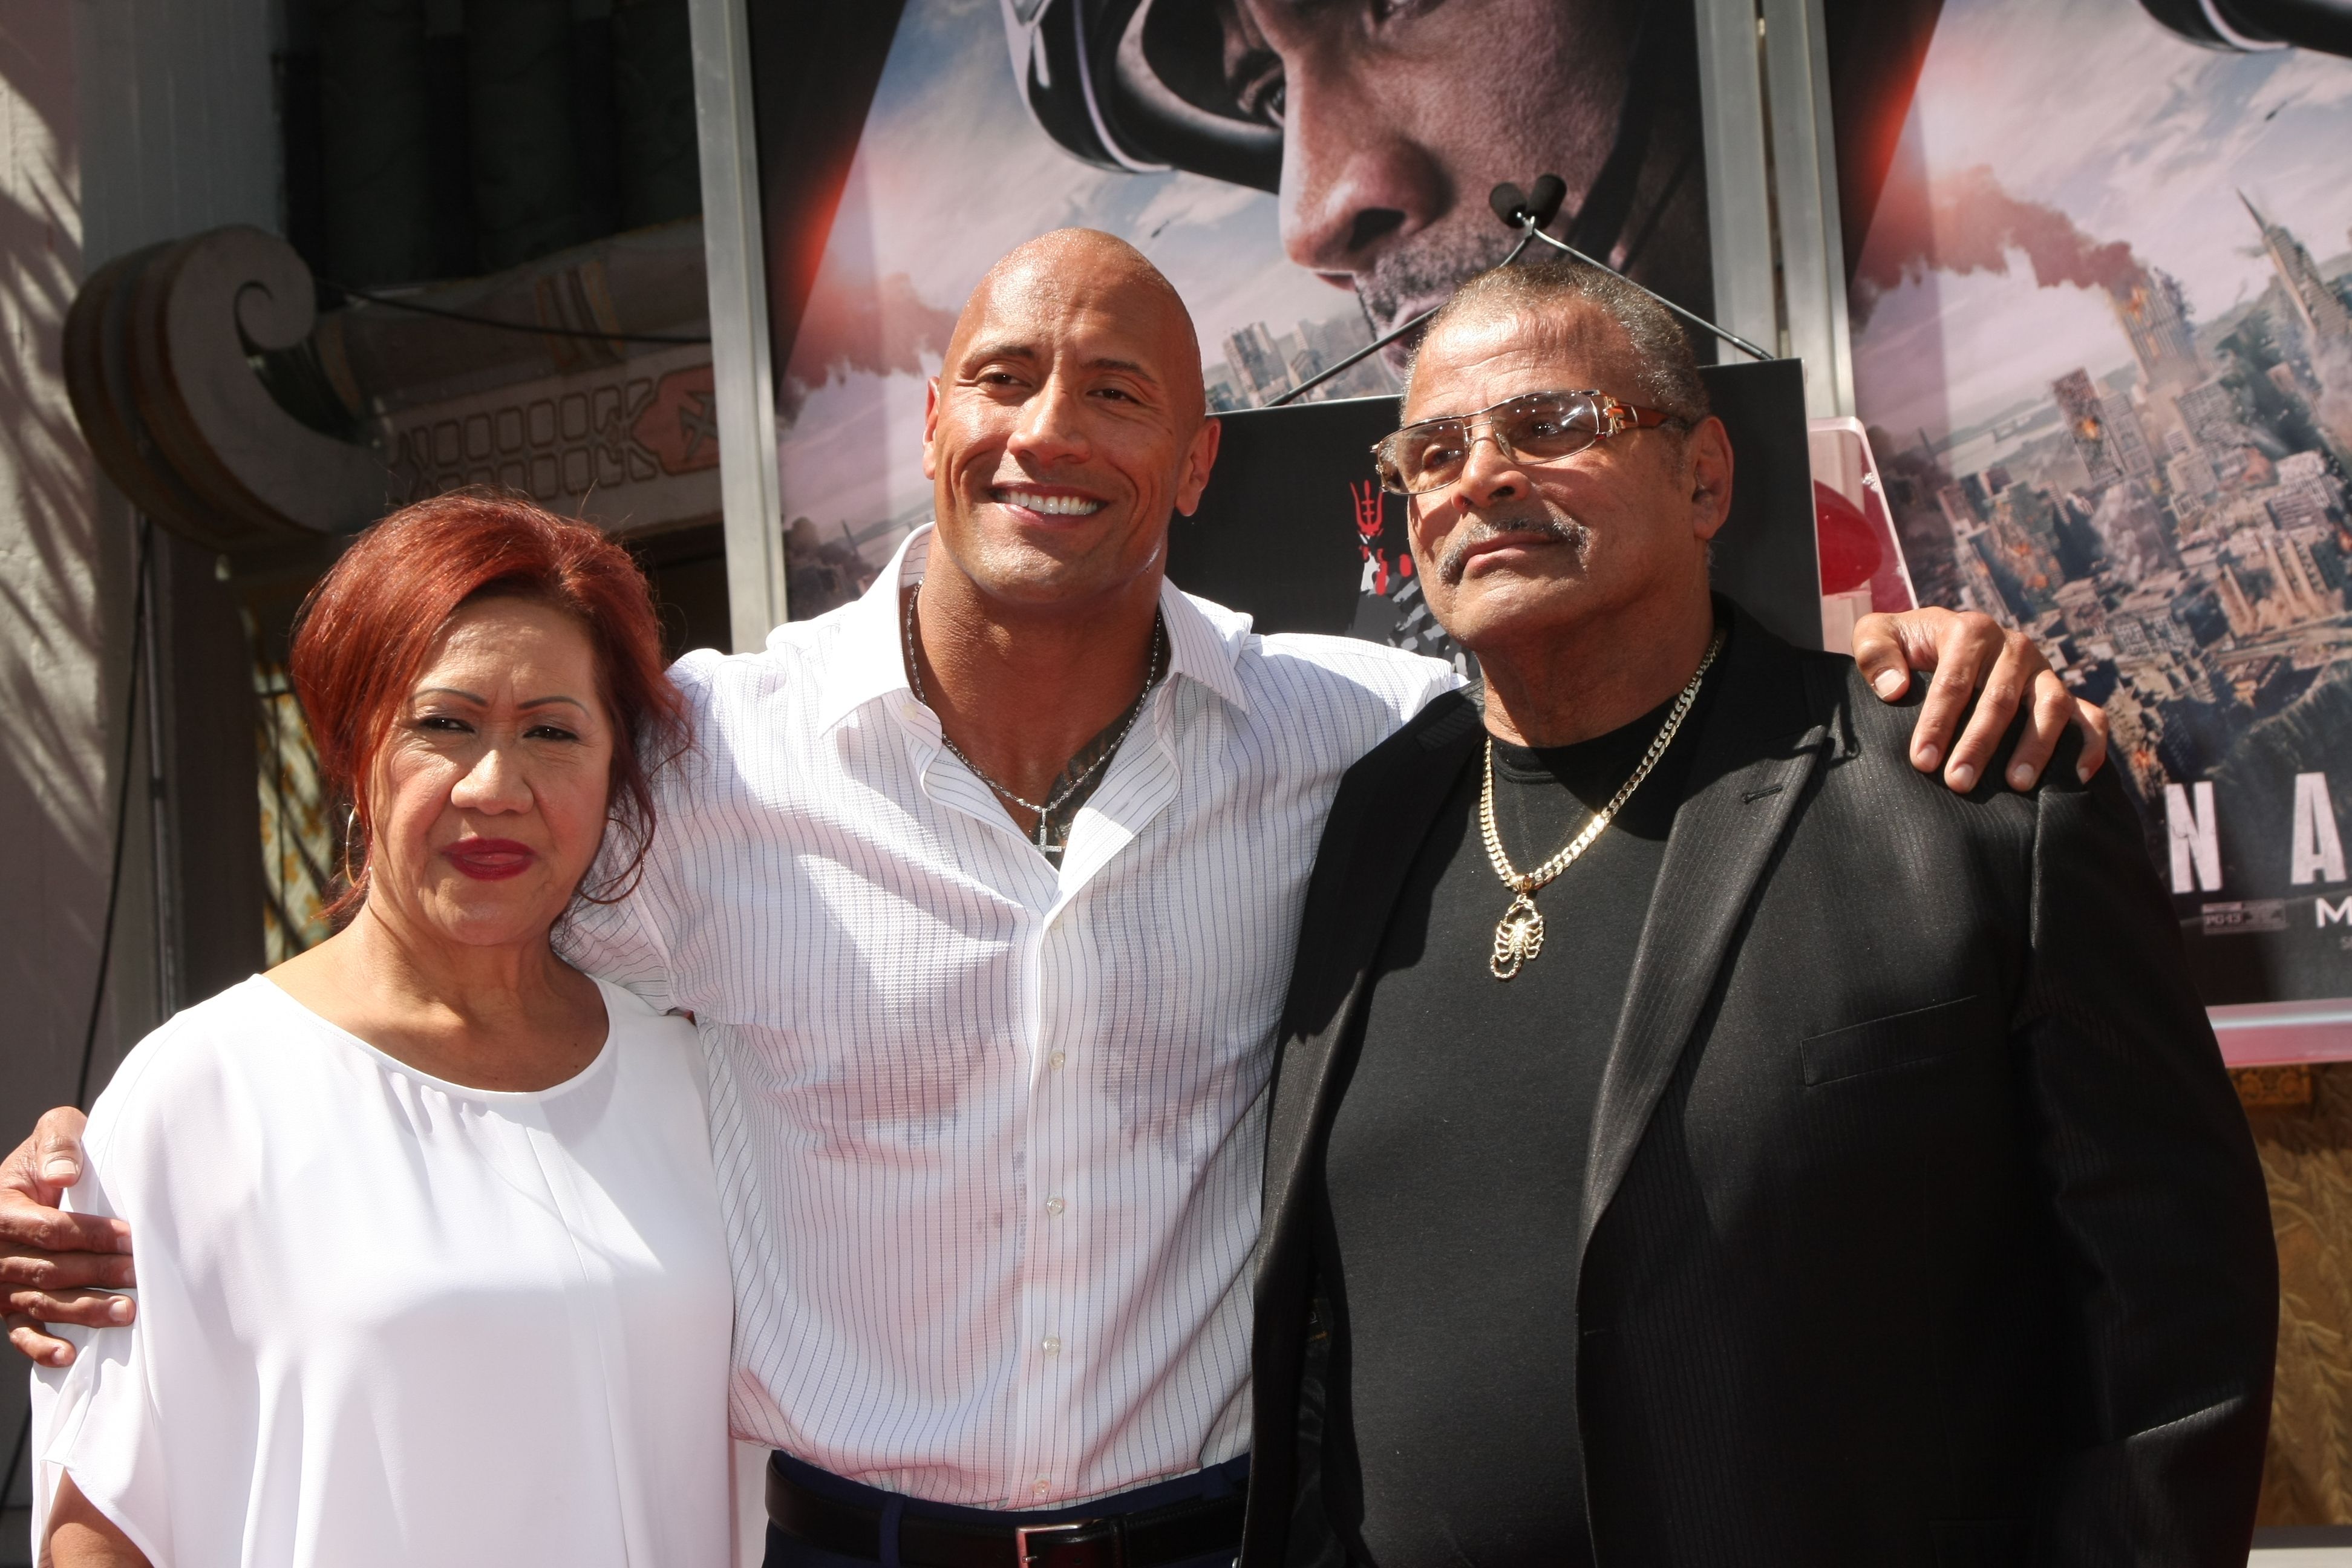 Dwayne "The Rock" Johnson at a movie premiere with his parents | Source: Getty Images/GlobalImagesUkraine